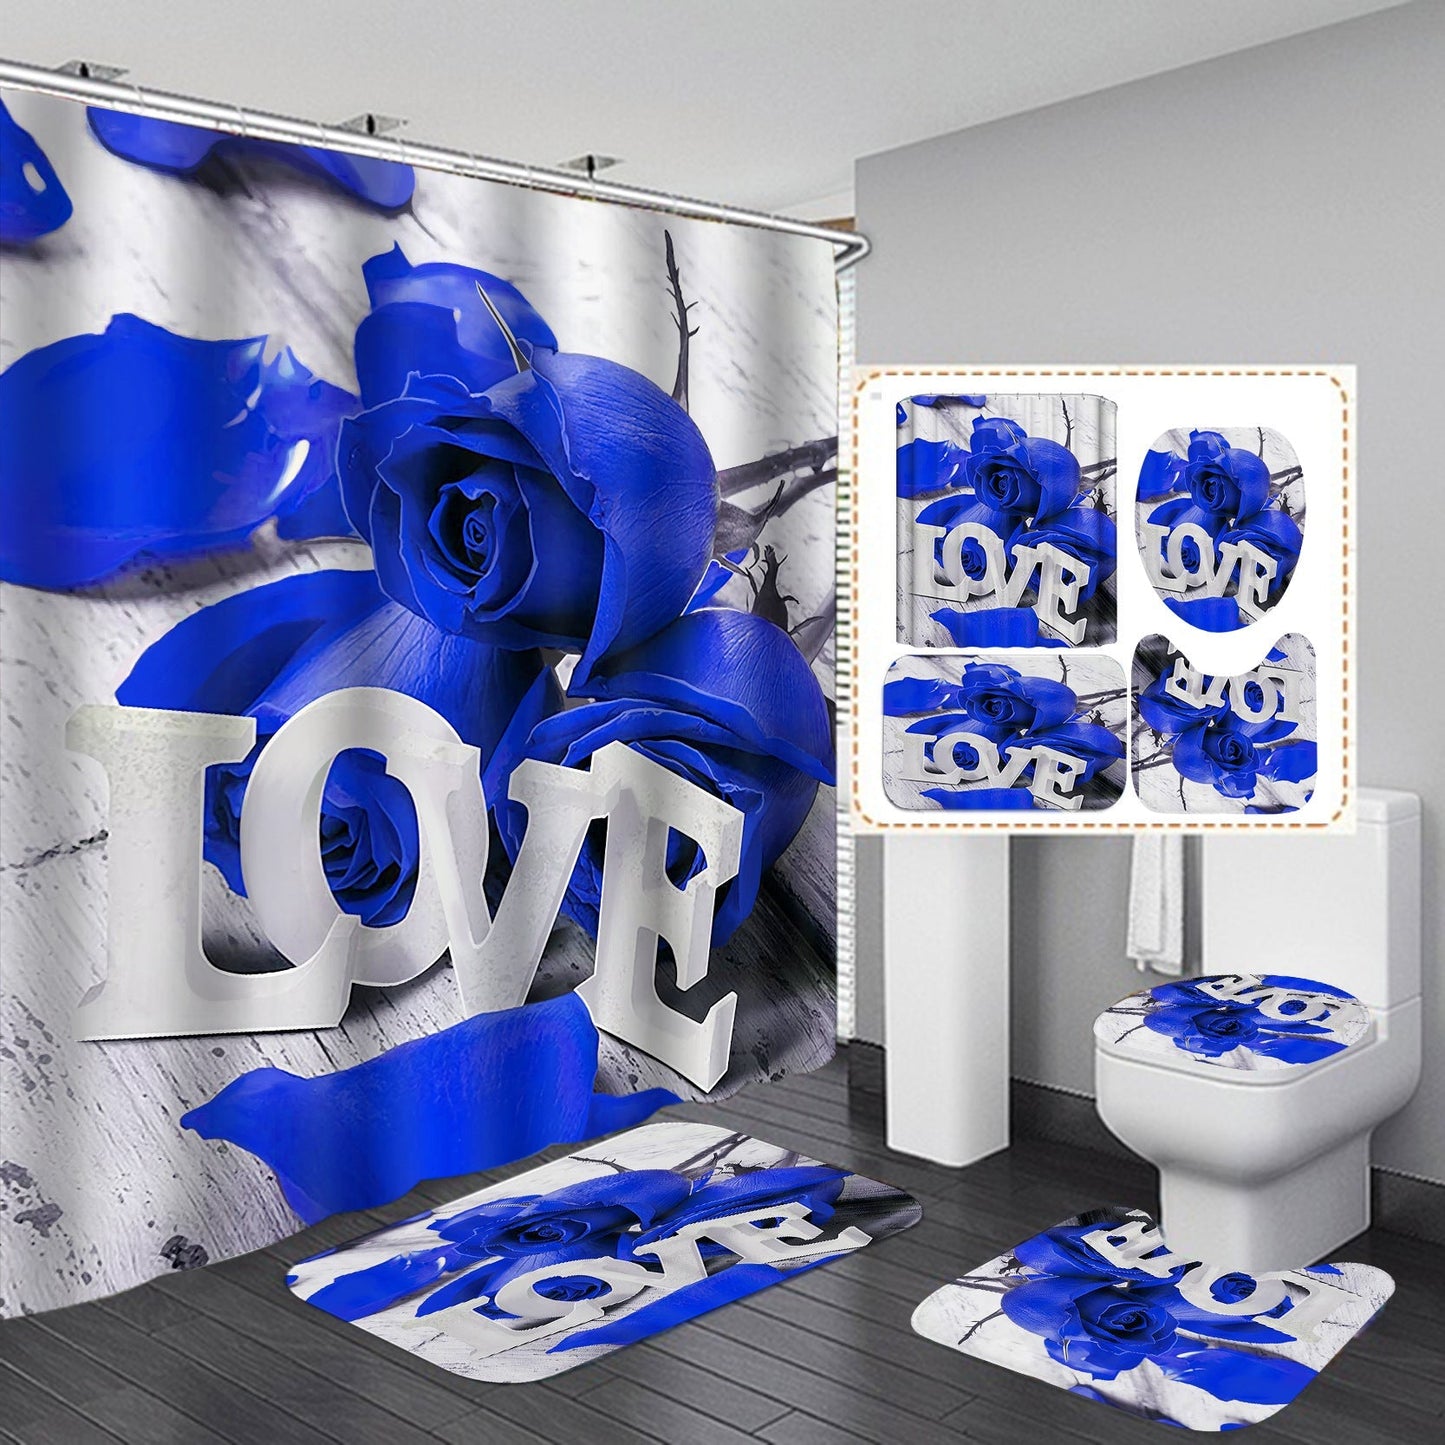 "Love" 3D Rose Design Shower Curtain Bathroom SetsNon-Slip Toilet Lid Cover-Shower Curtain-180×180cm Shower Curtain Only-2-Free Shipping Leatheretro